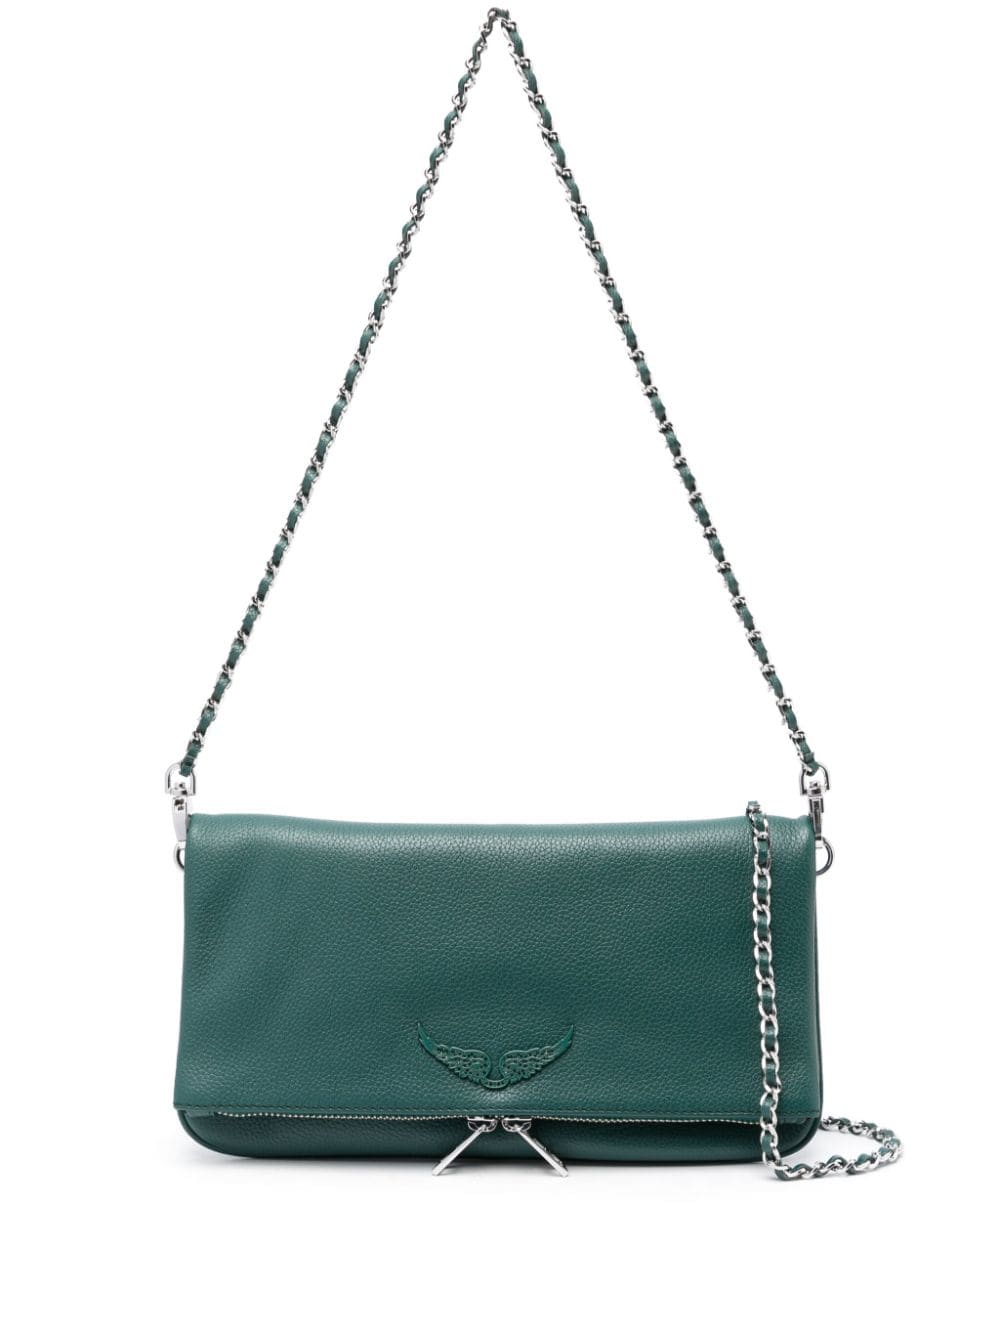 Zadig & Voltaire Leather One Shoulder Bag Chain Double Bag for Women Green